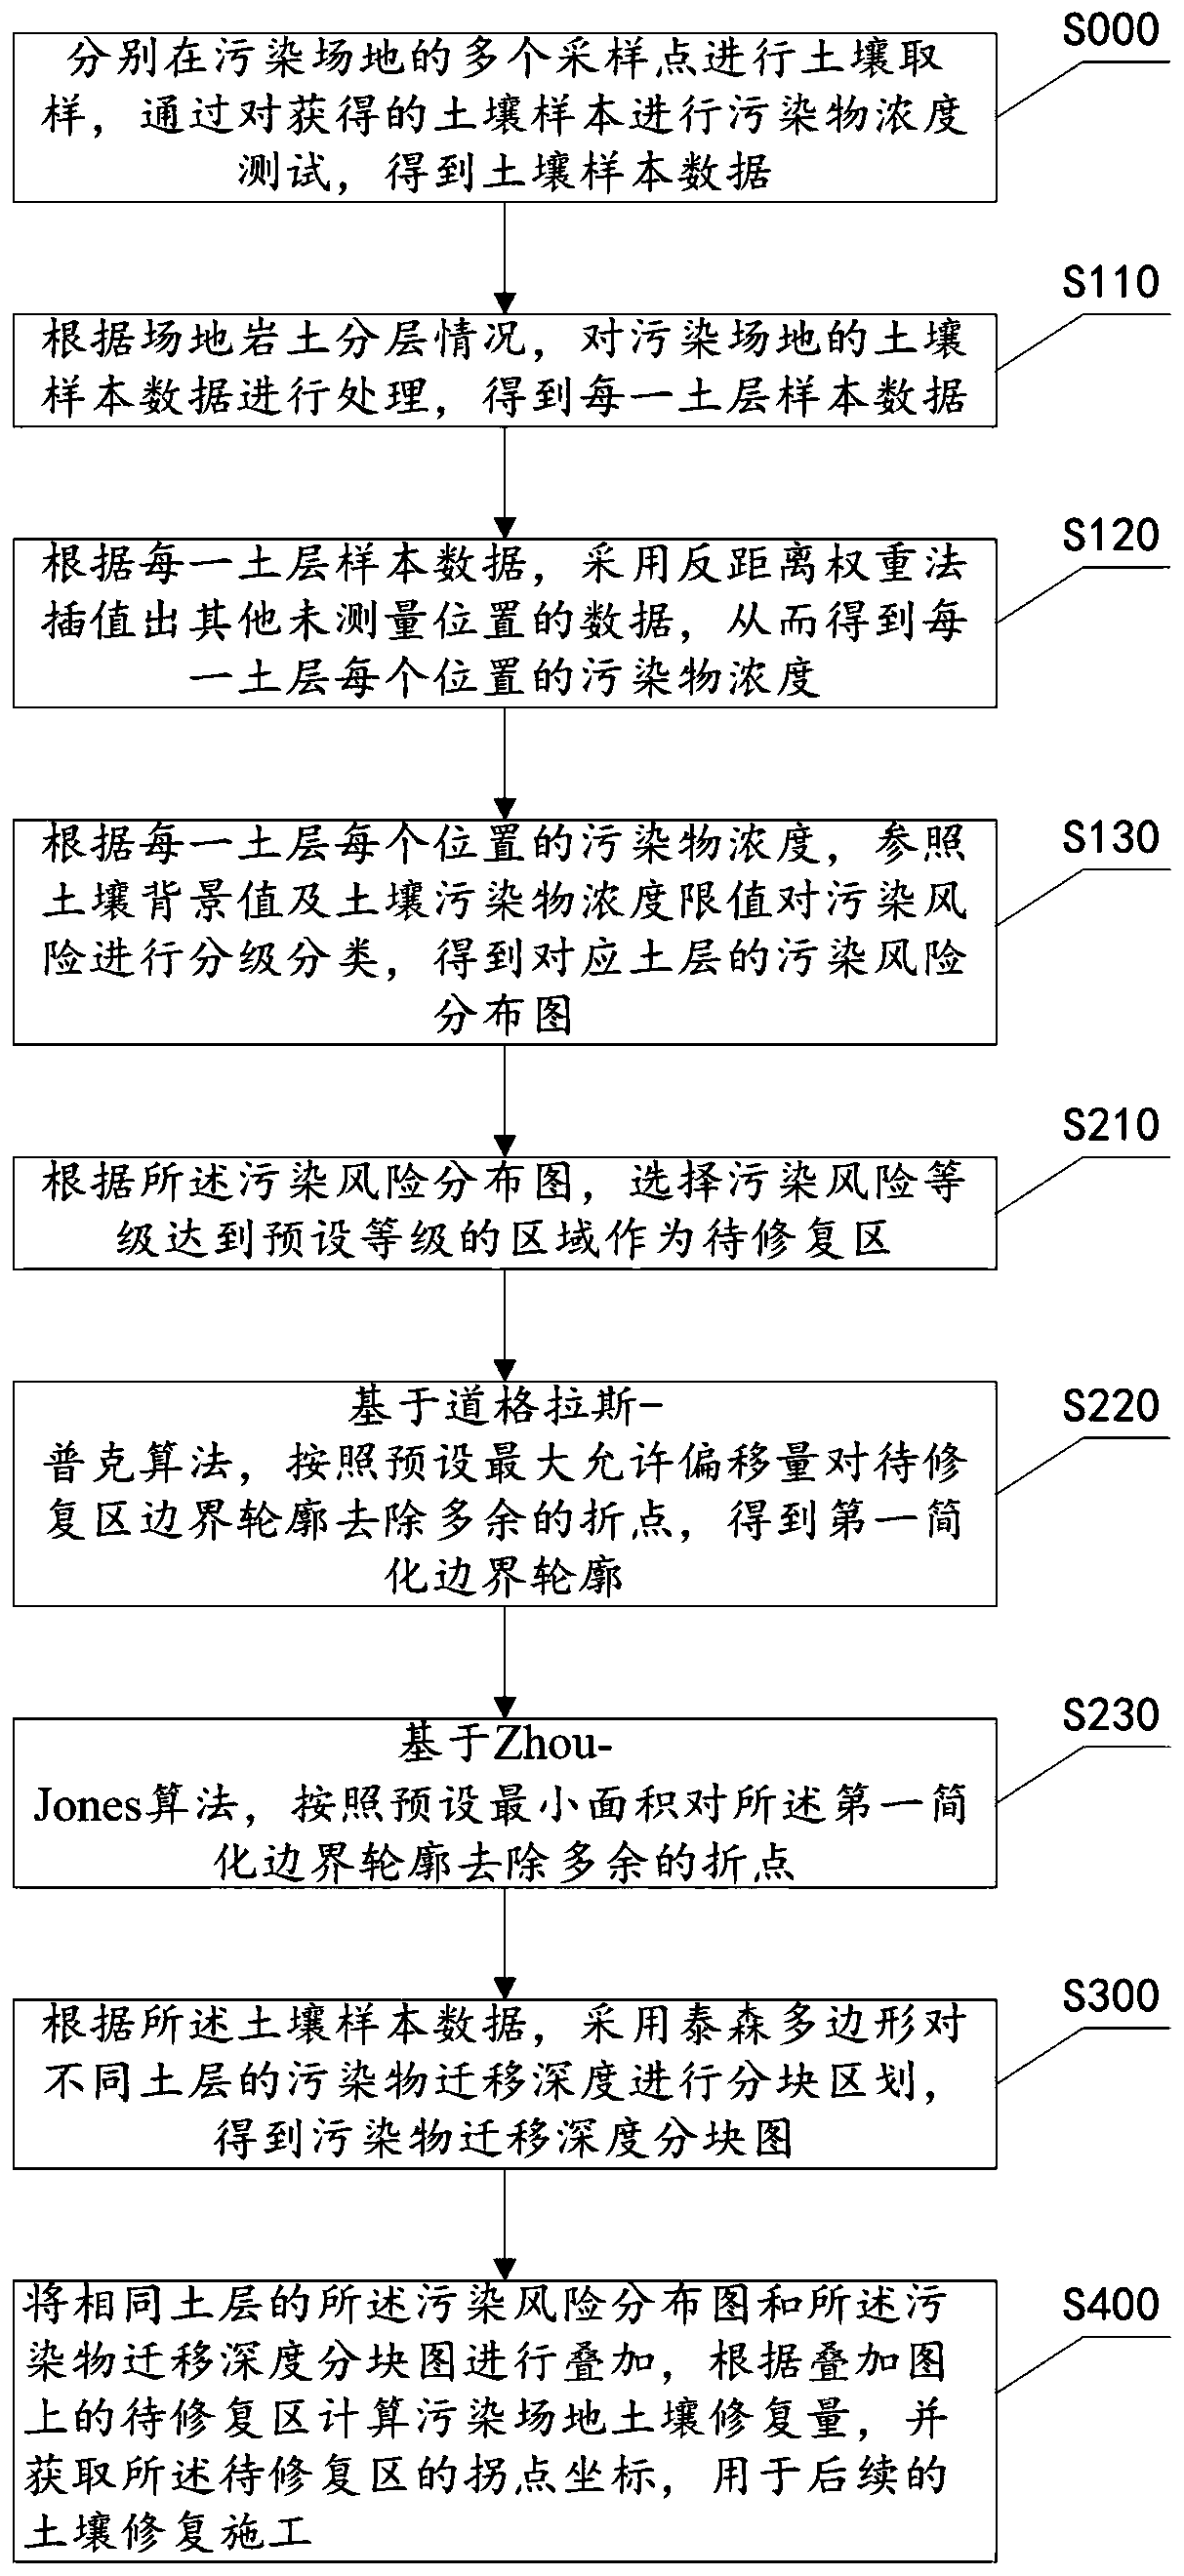 Method and system for calculating soil remediation amount of contaminated site